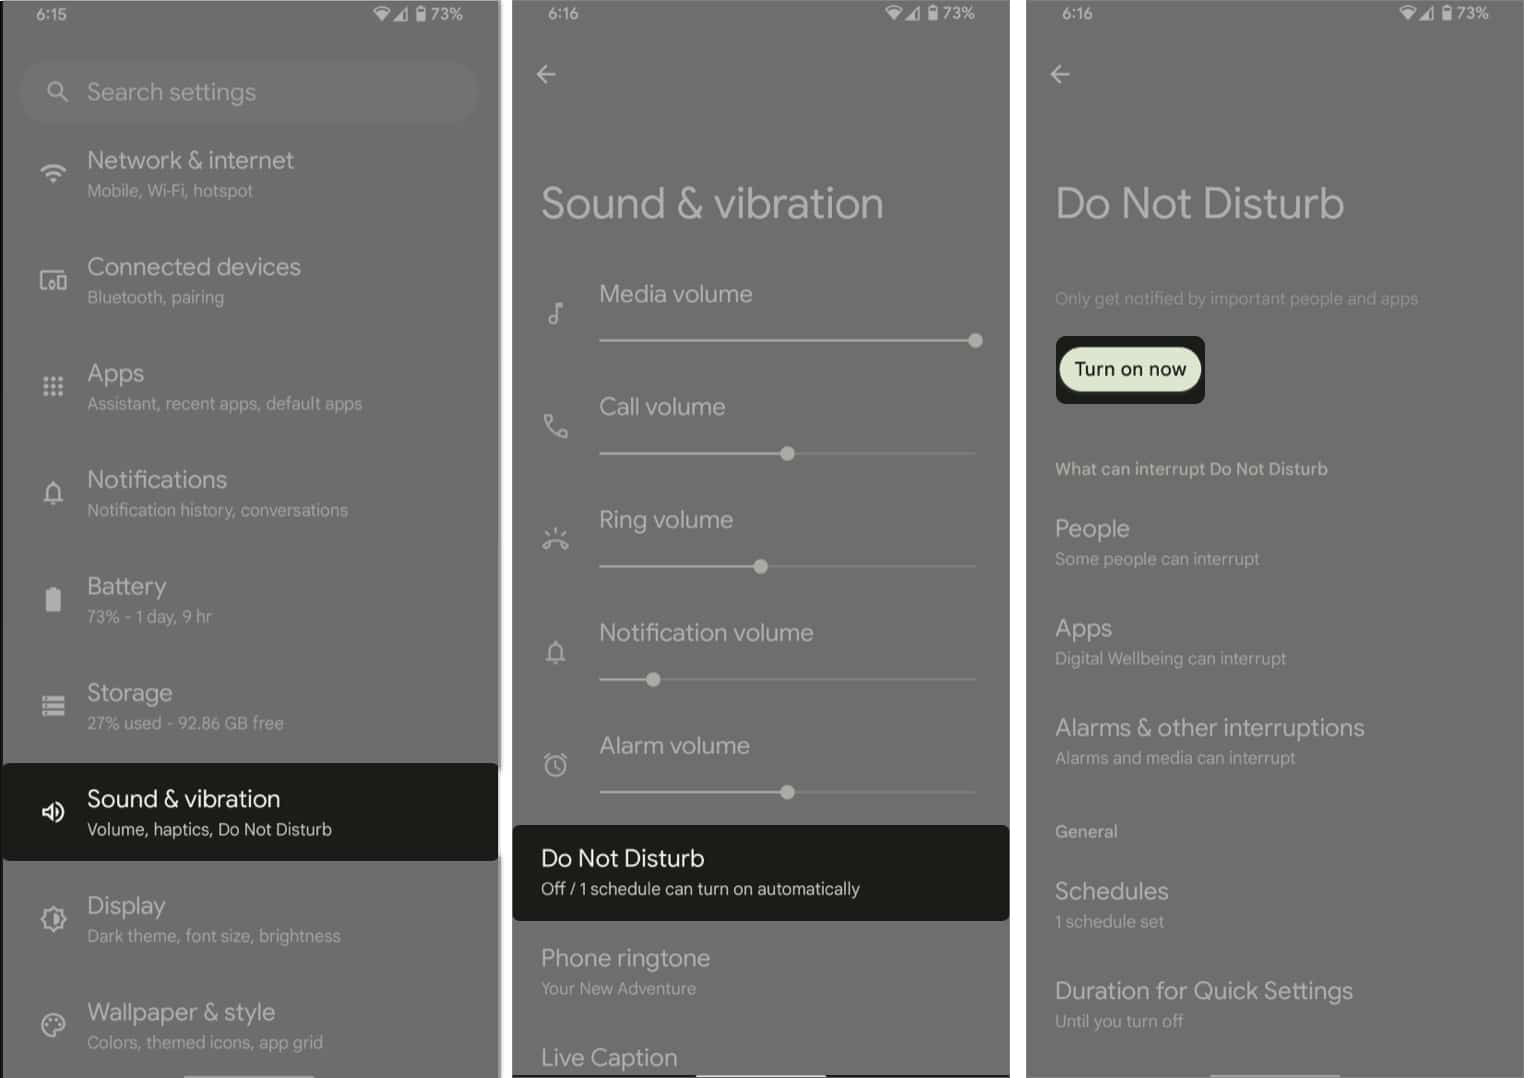 Go to Settings, Sound & vibration, Do Not Disturb, Turn on now